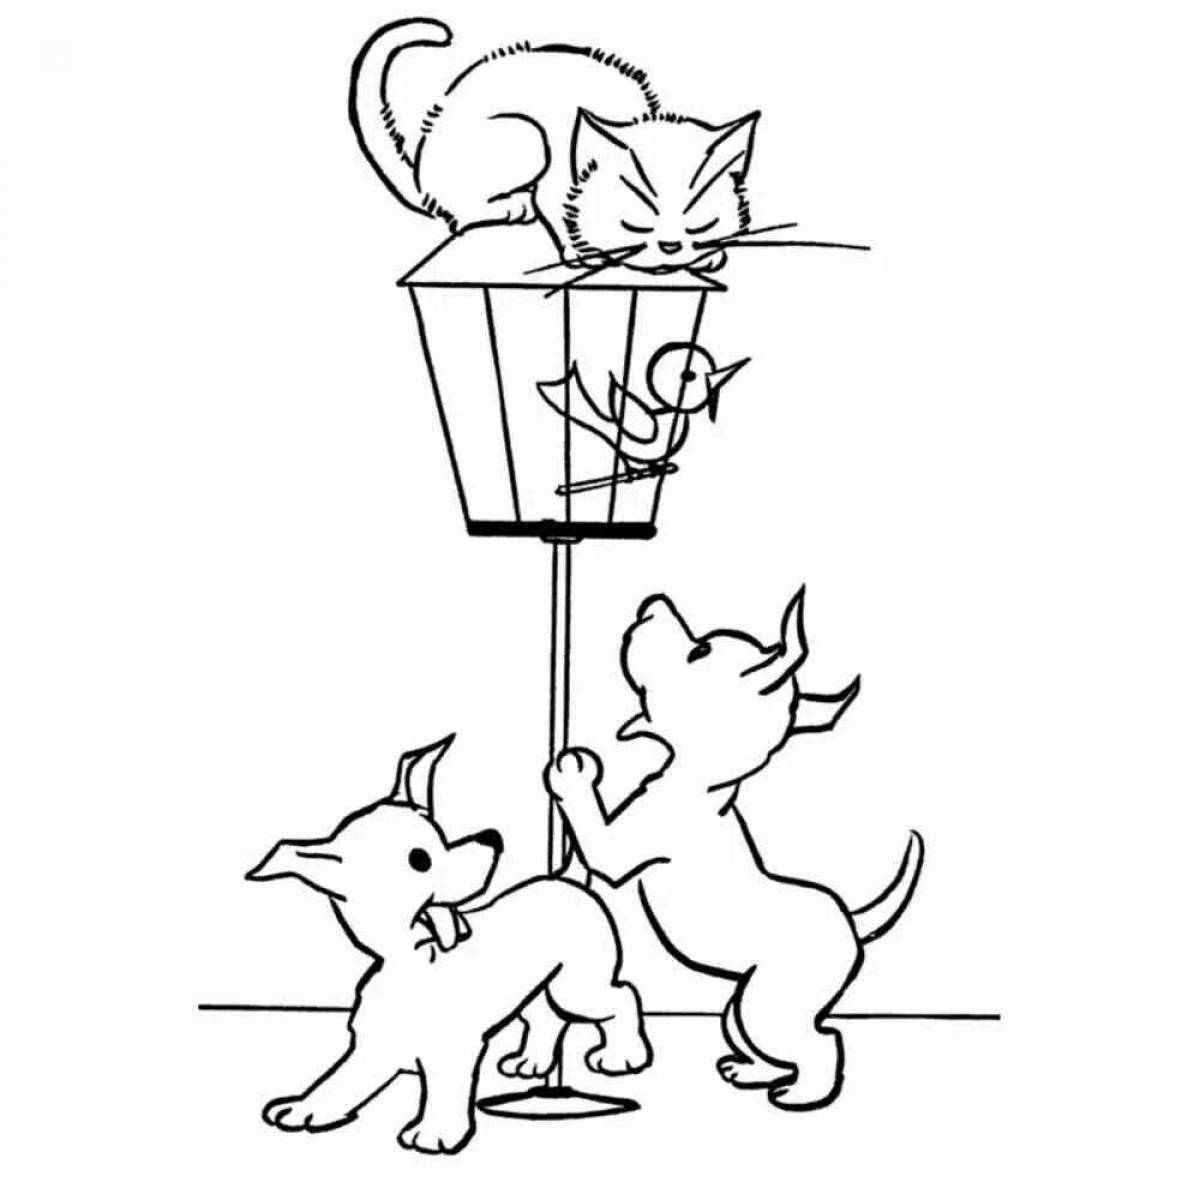 Adorable dog and cat coloring page